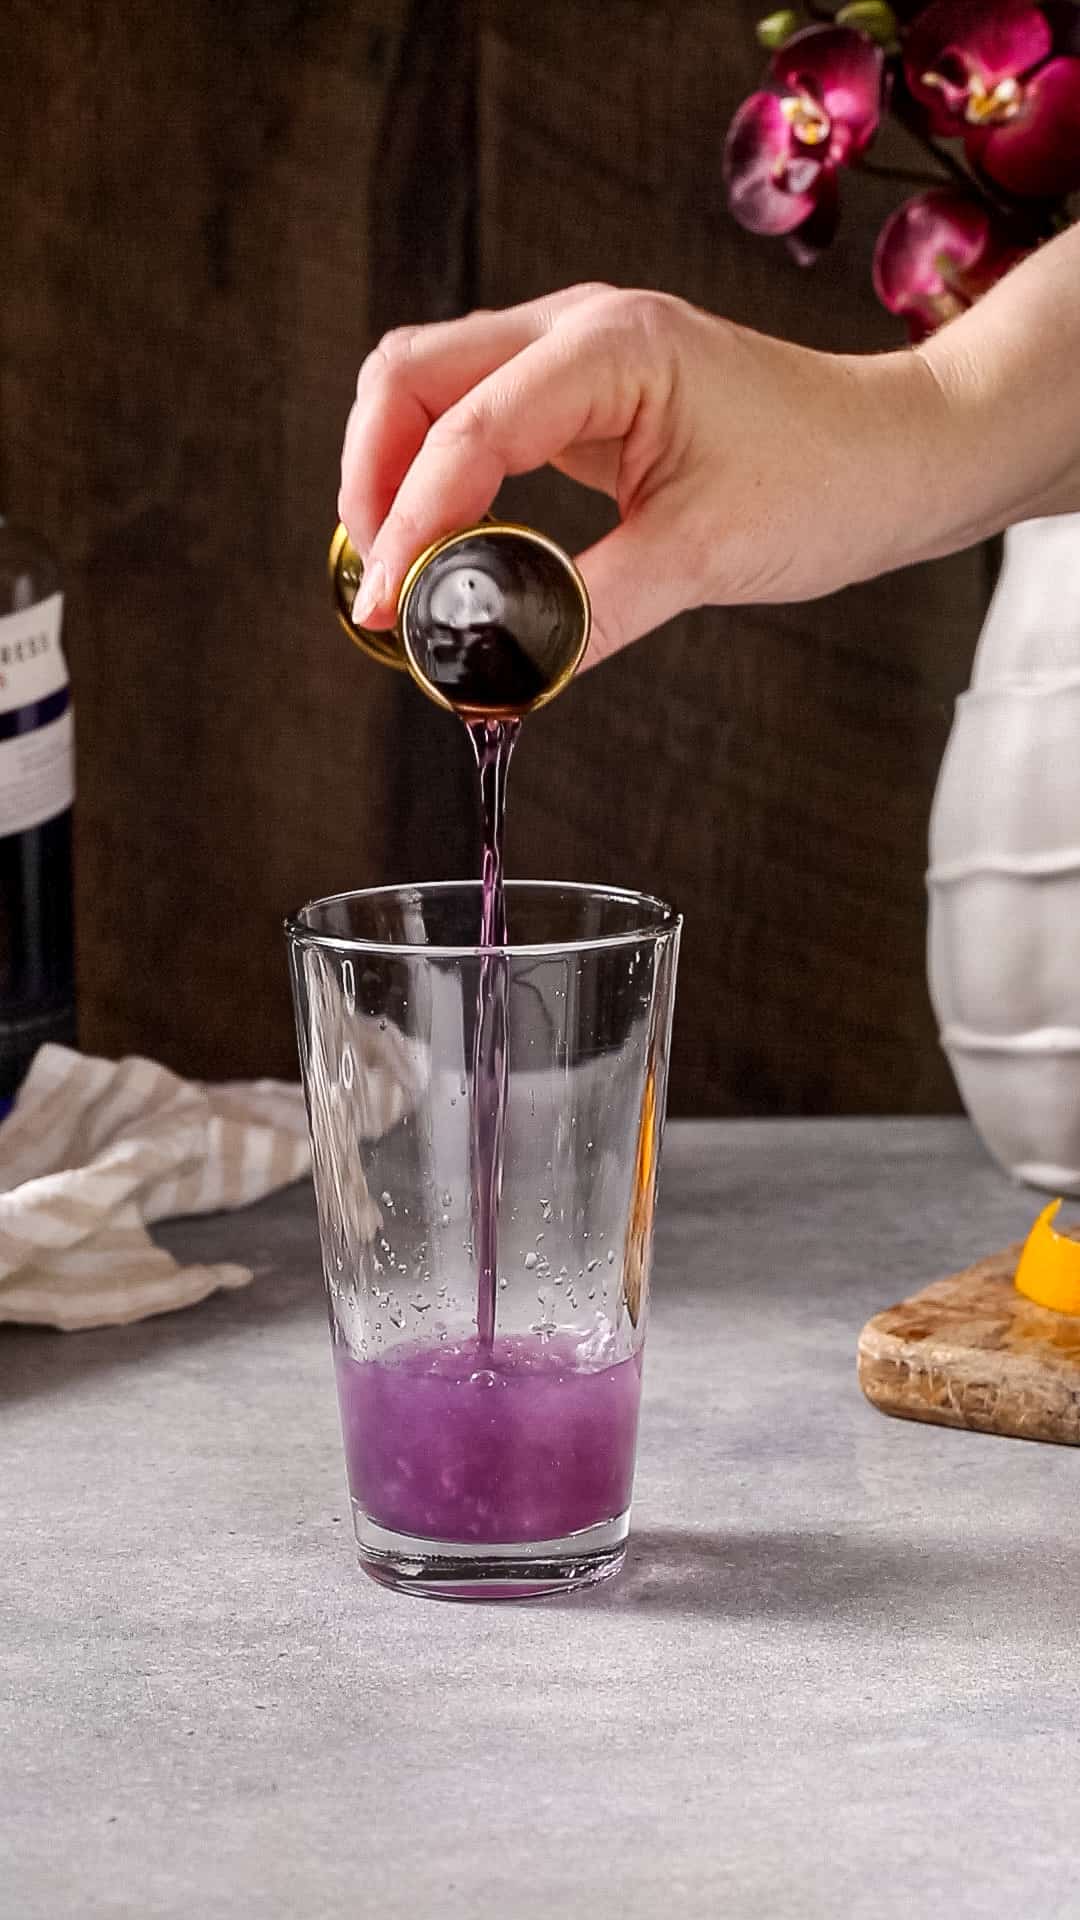 crème de violette being added to the cocktail shaker glass.